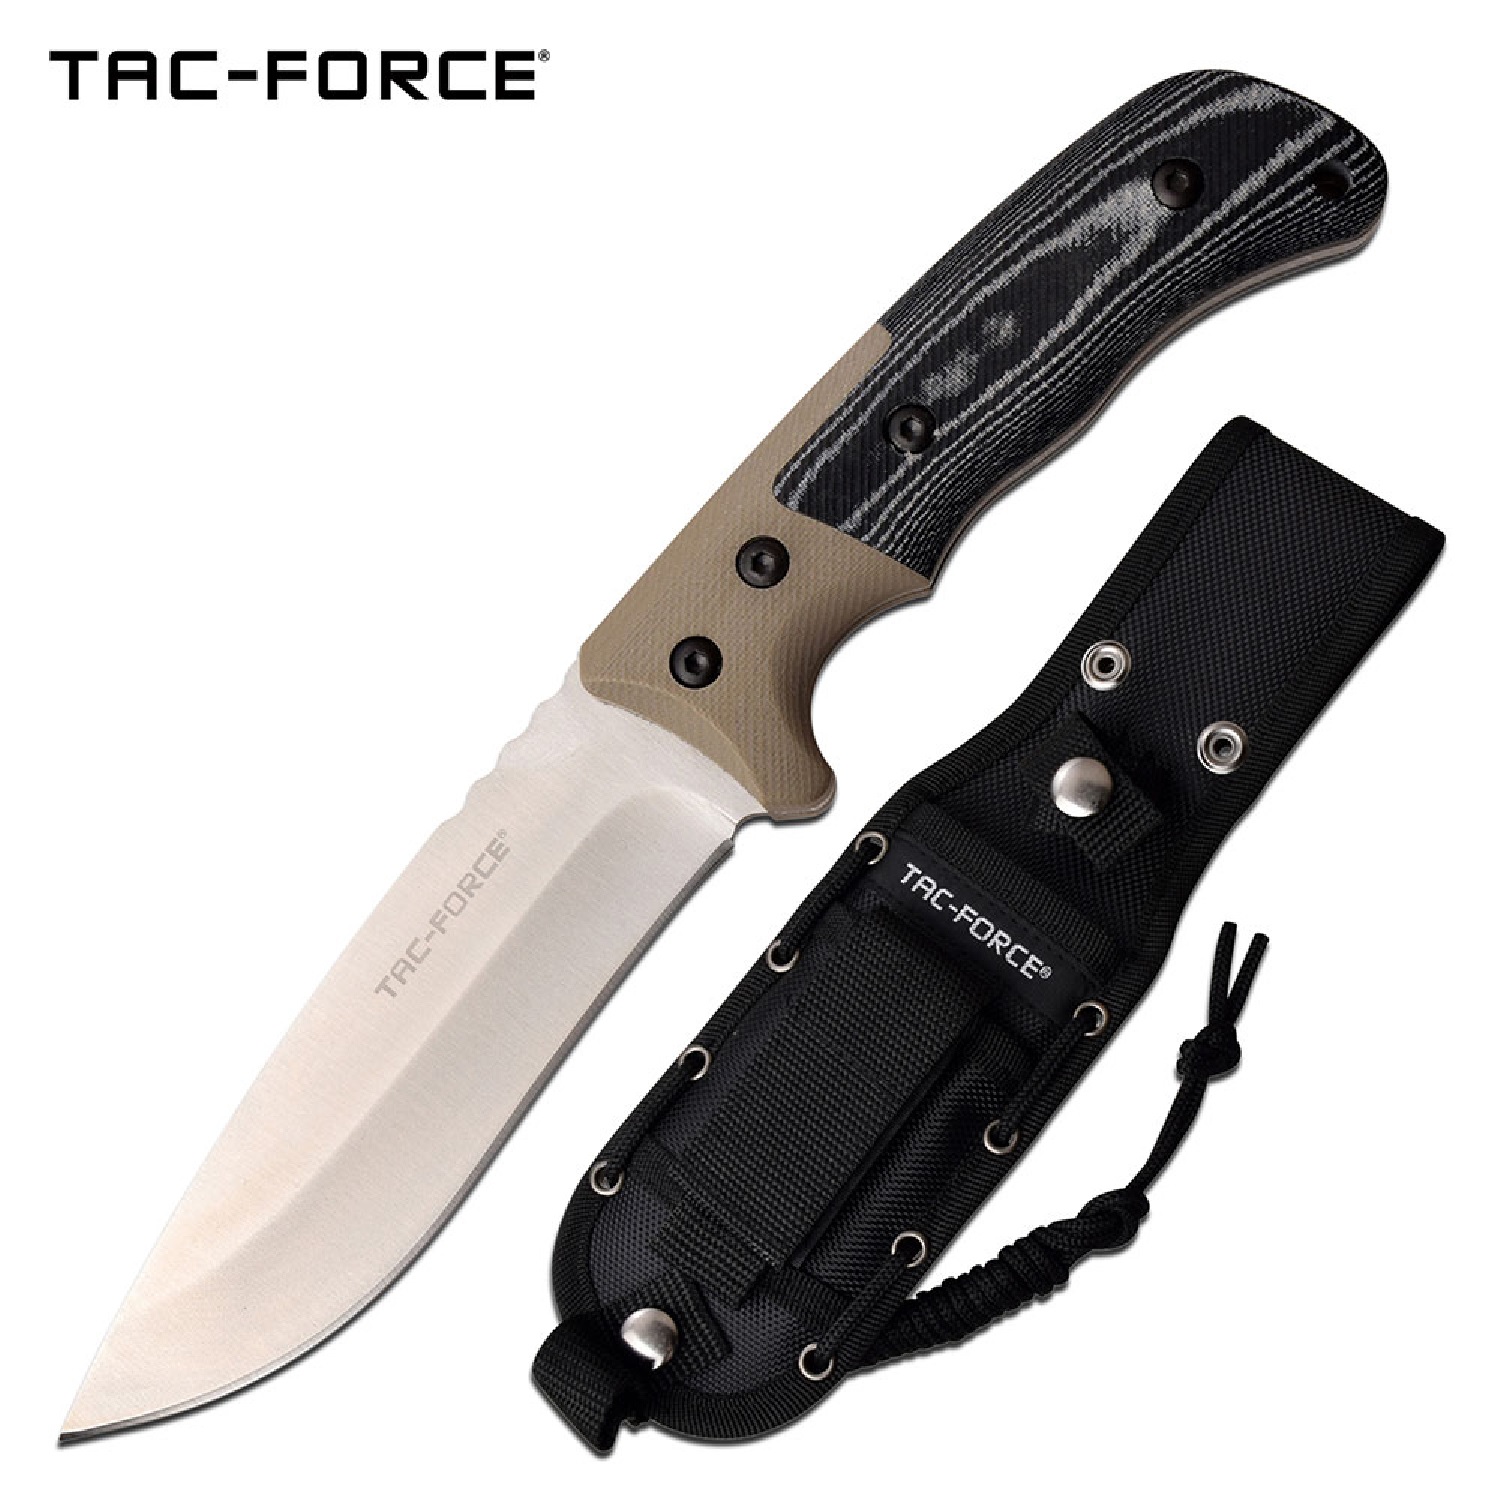 TAC Force Tac-force Fixed 4.9 In Blade Tan-white Micarta Handle - Tf-fix006tn